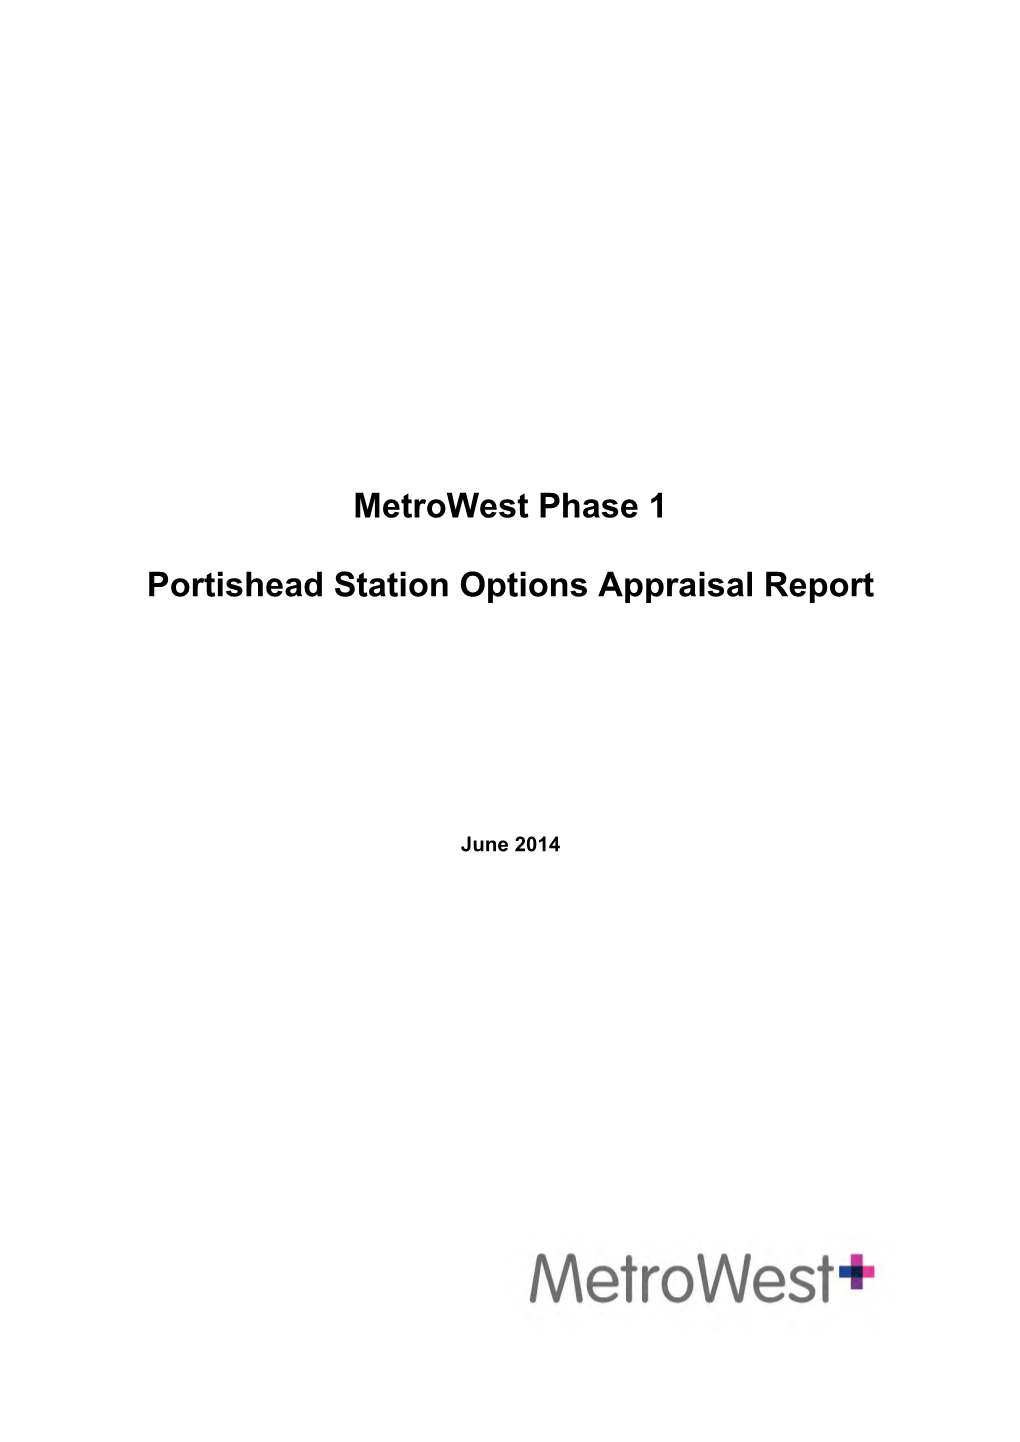 Metrowest Phase 1 Portishead Station Options Appraisal Report